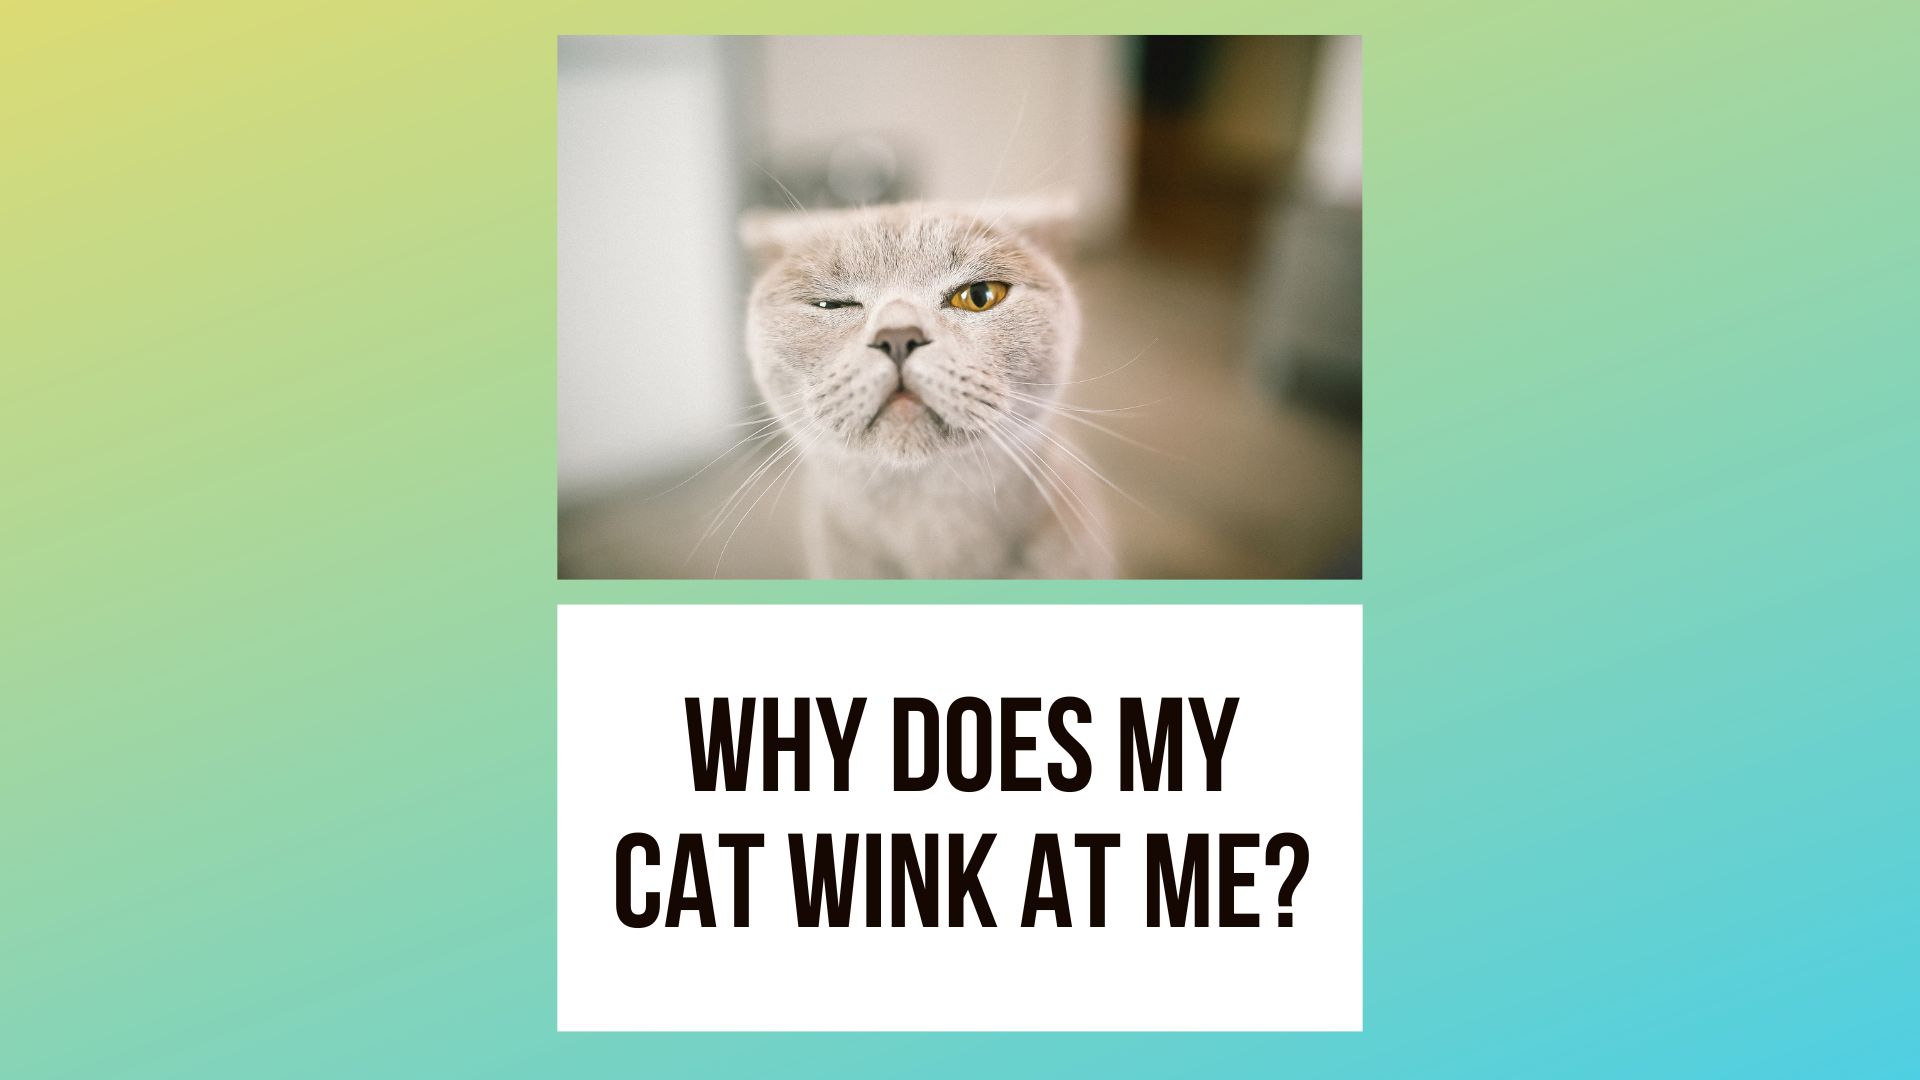 Why Does My Cat Wink at Me? What Does It Mean